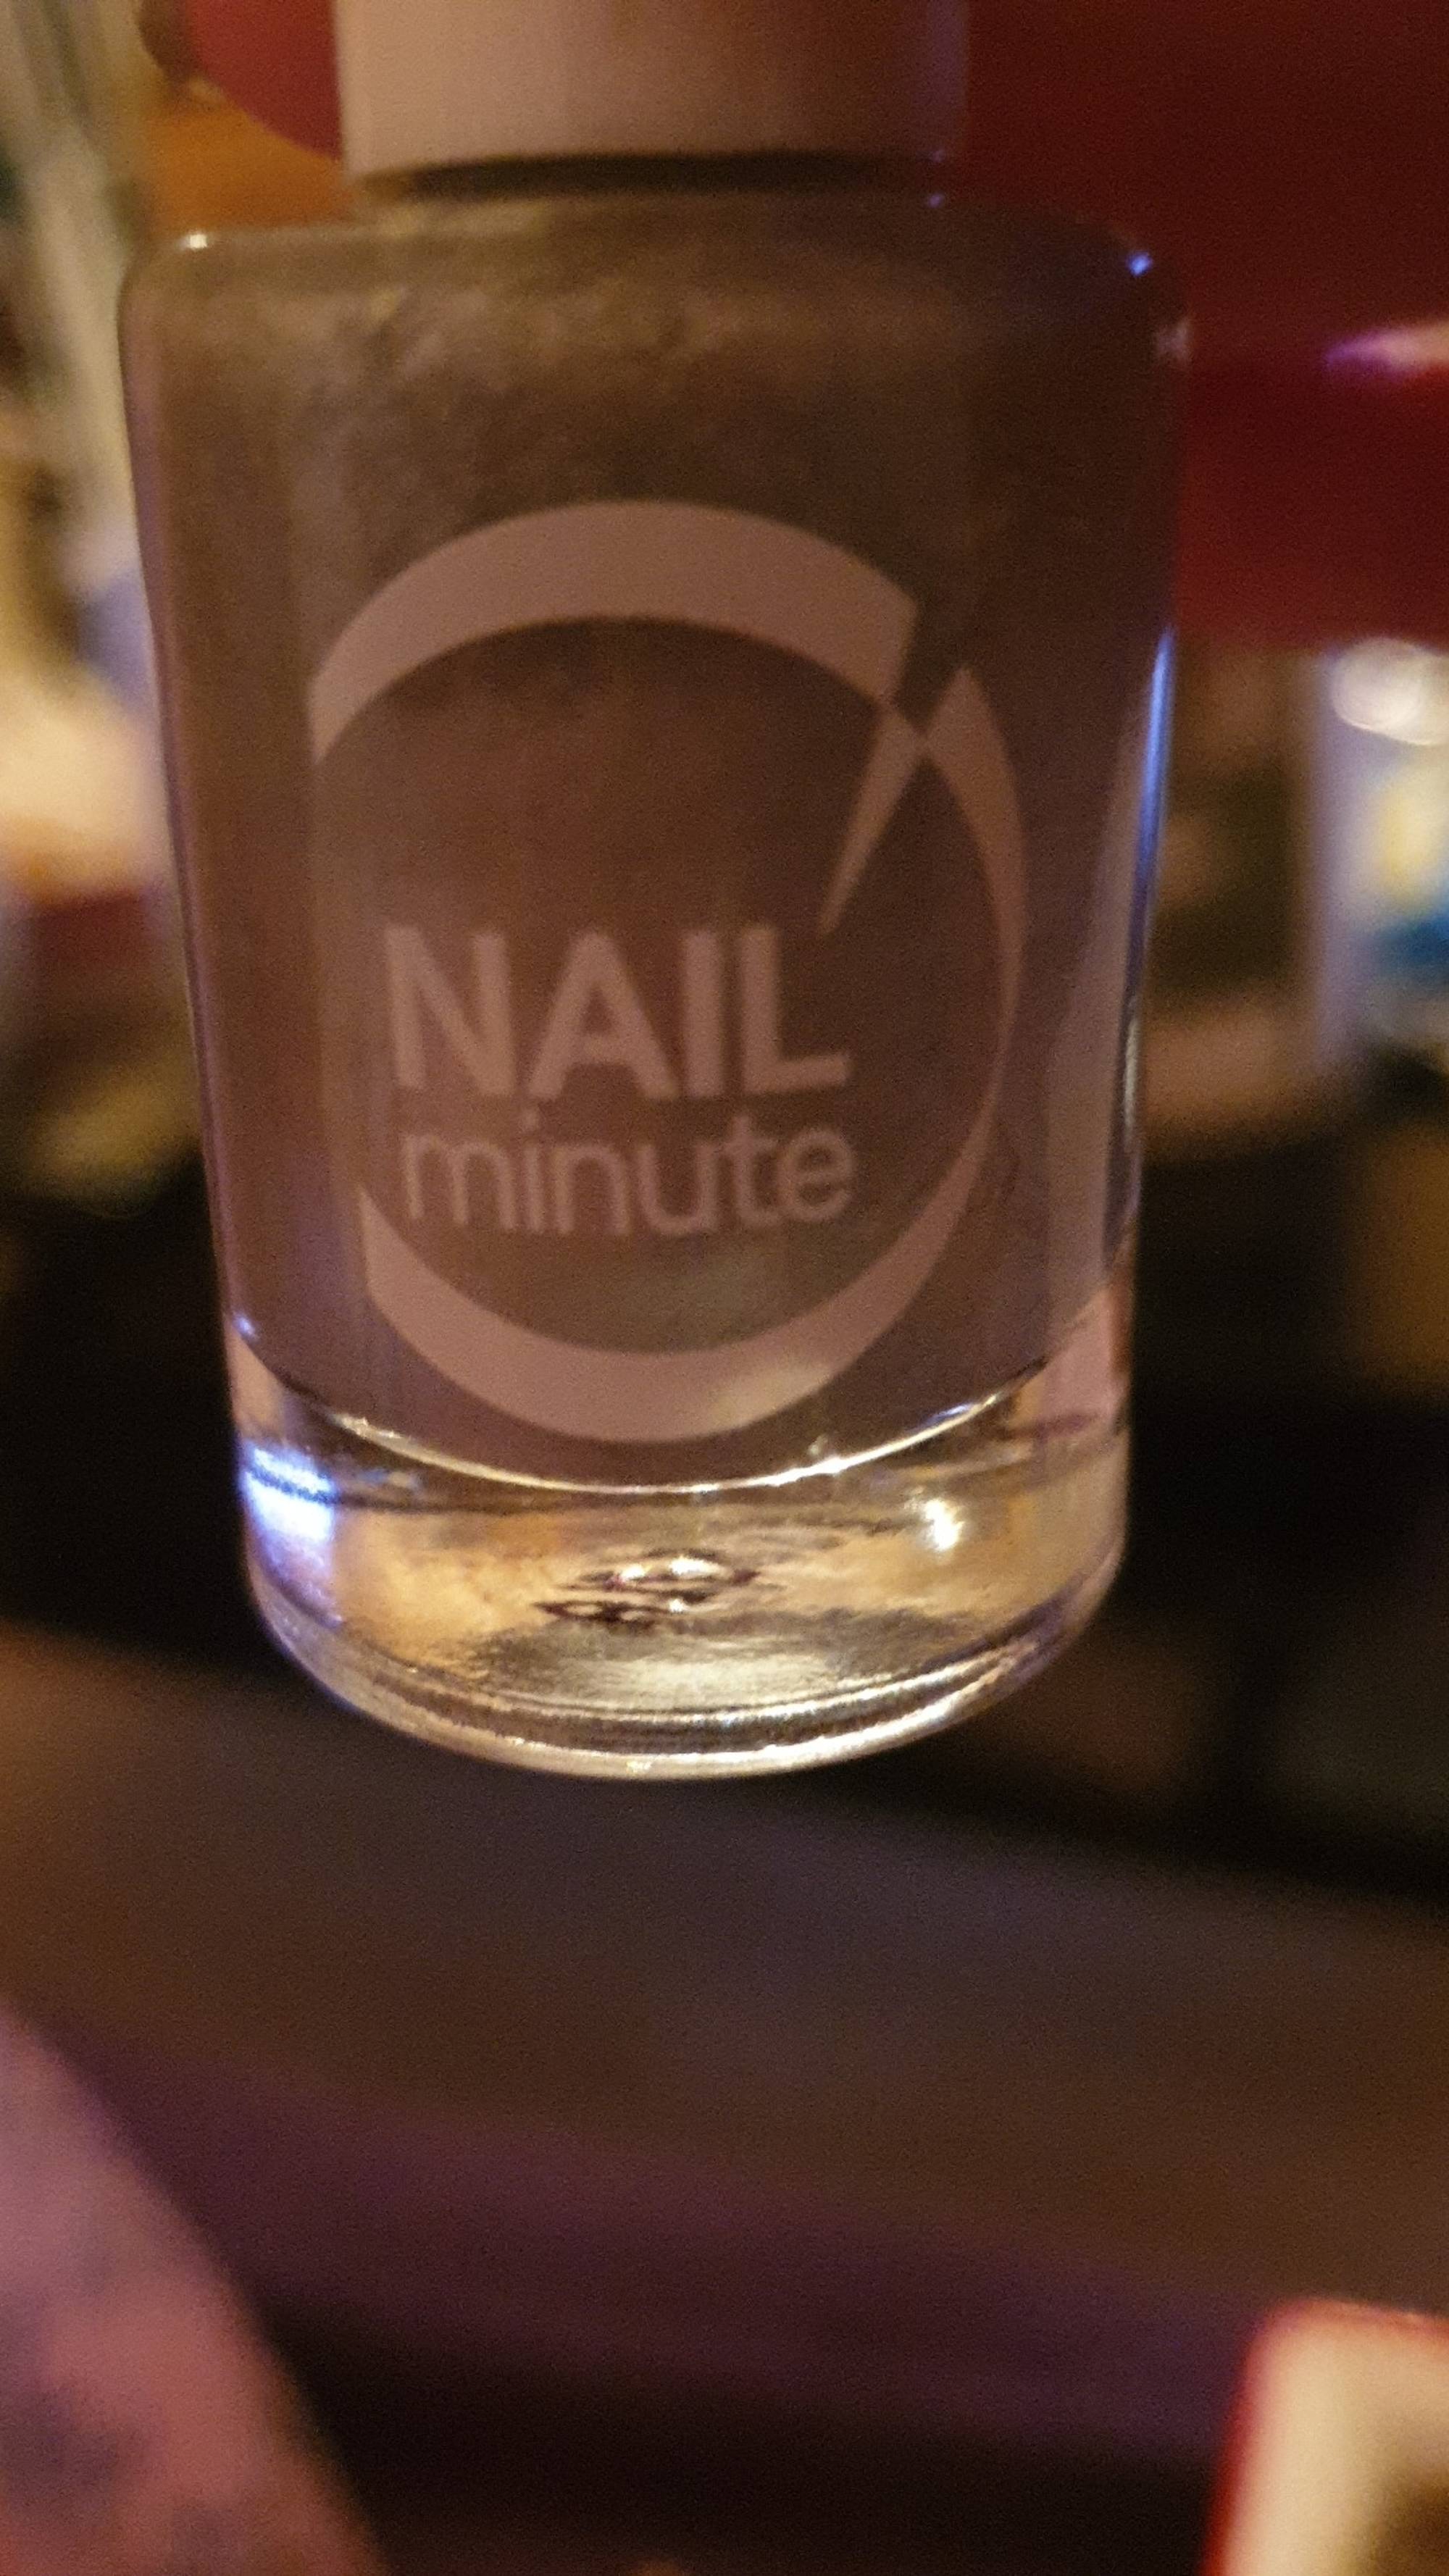 BODY'MINUTE - Nail minute - Vernis à ongles